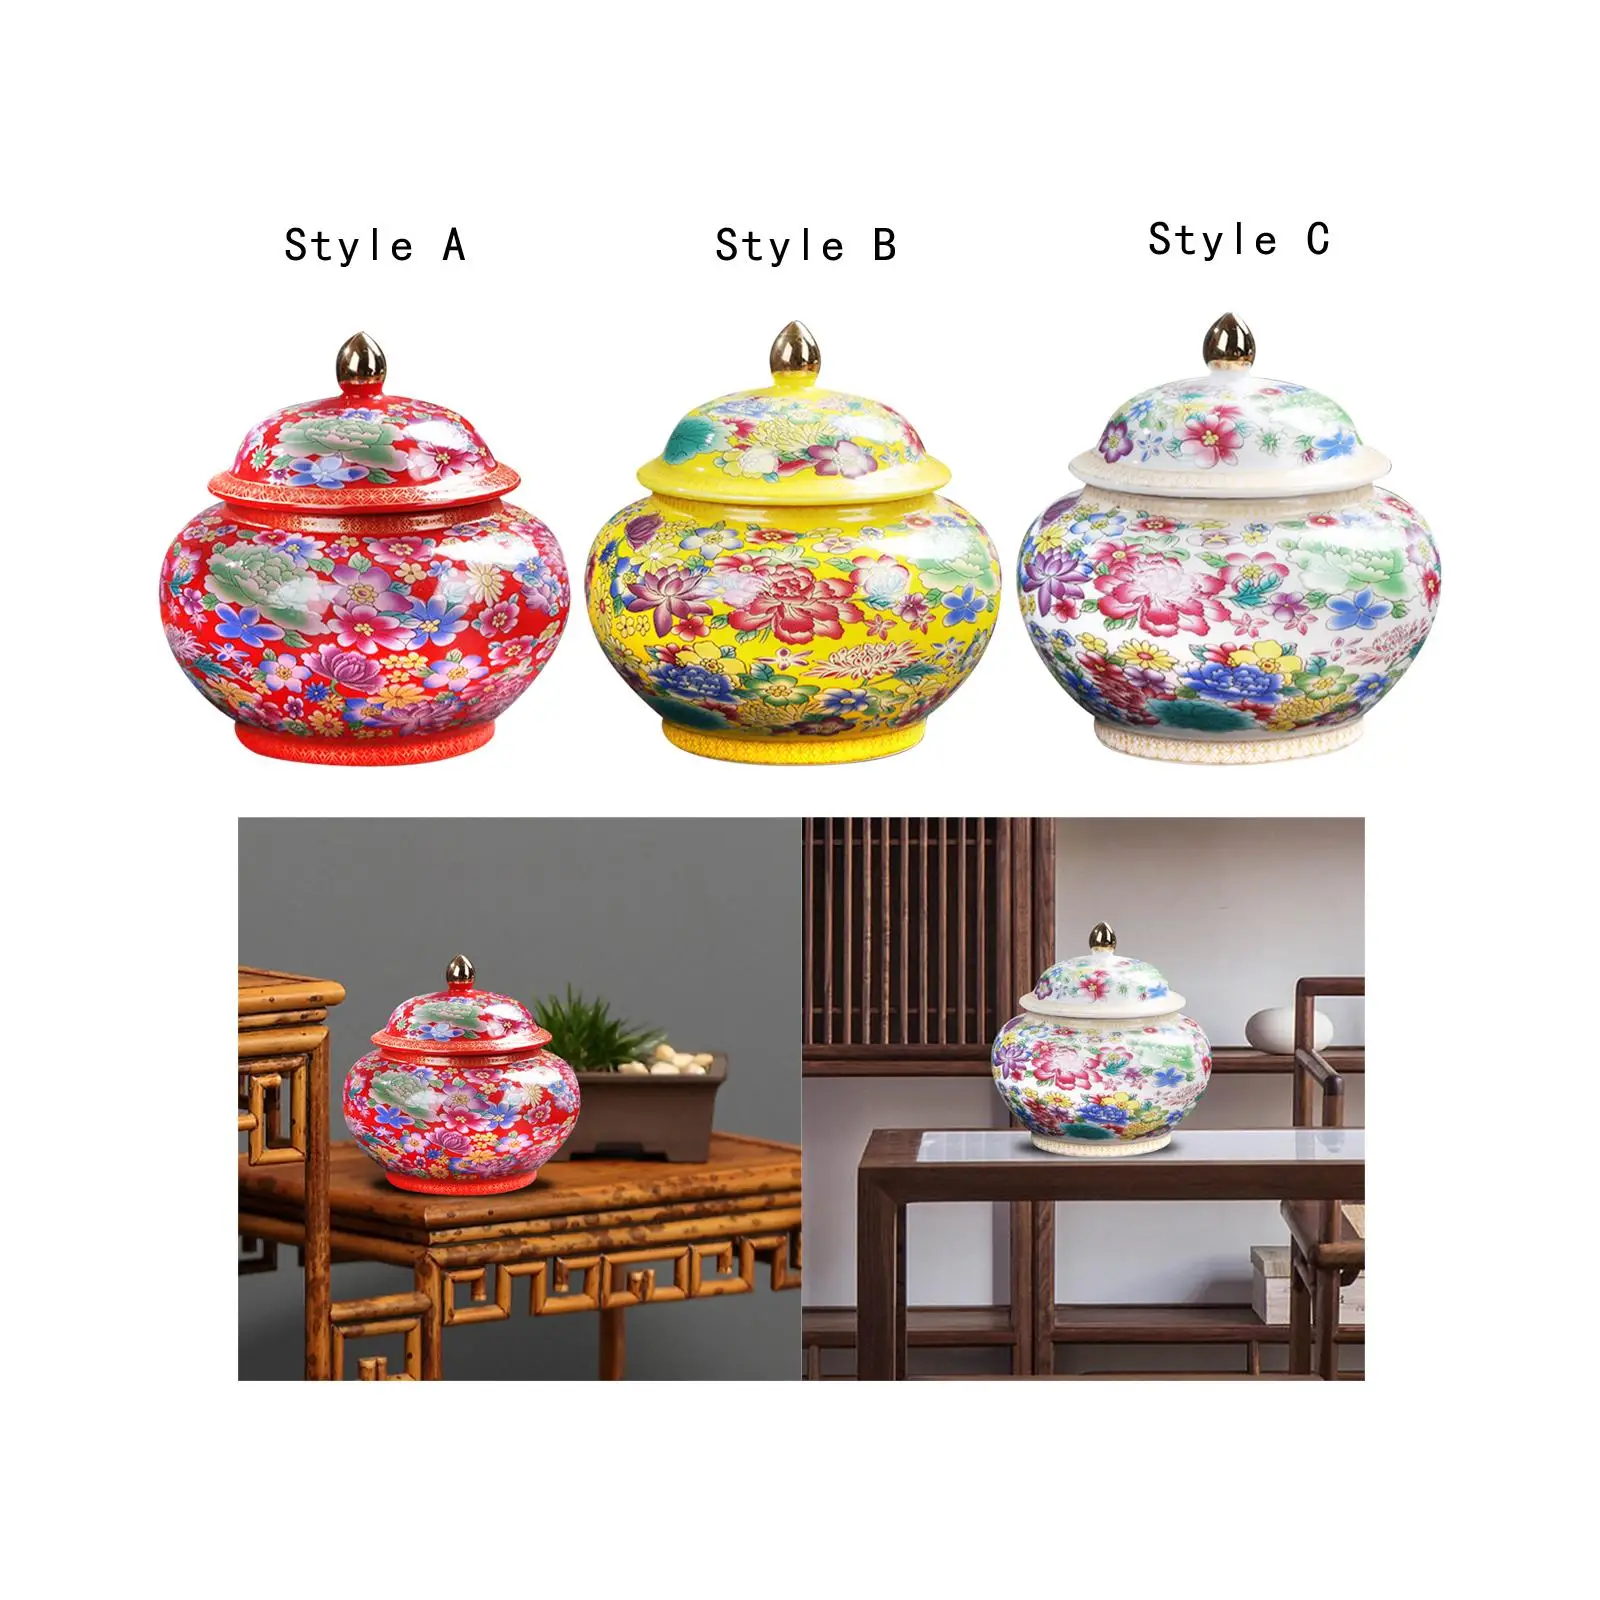 Porcelain Colour Enamel Tea Storage Container Ginger Jar 14x14cm Small Size Multipurpose Chinese Style with Lid for Kitchen